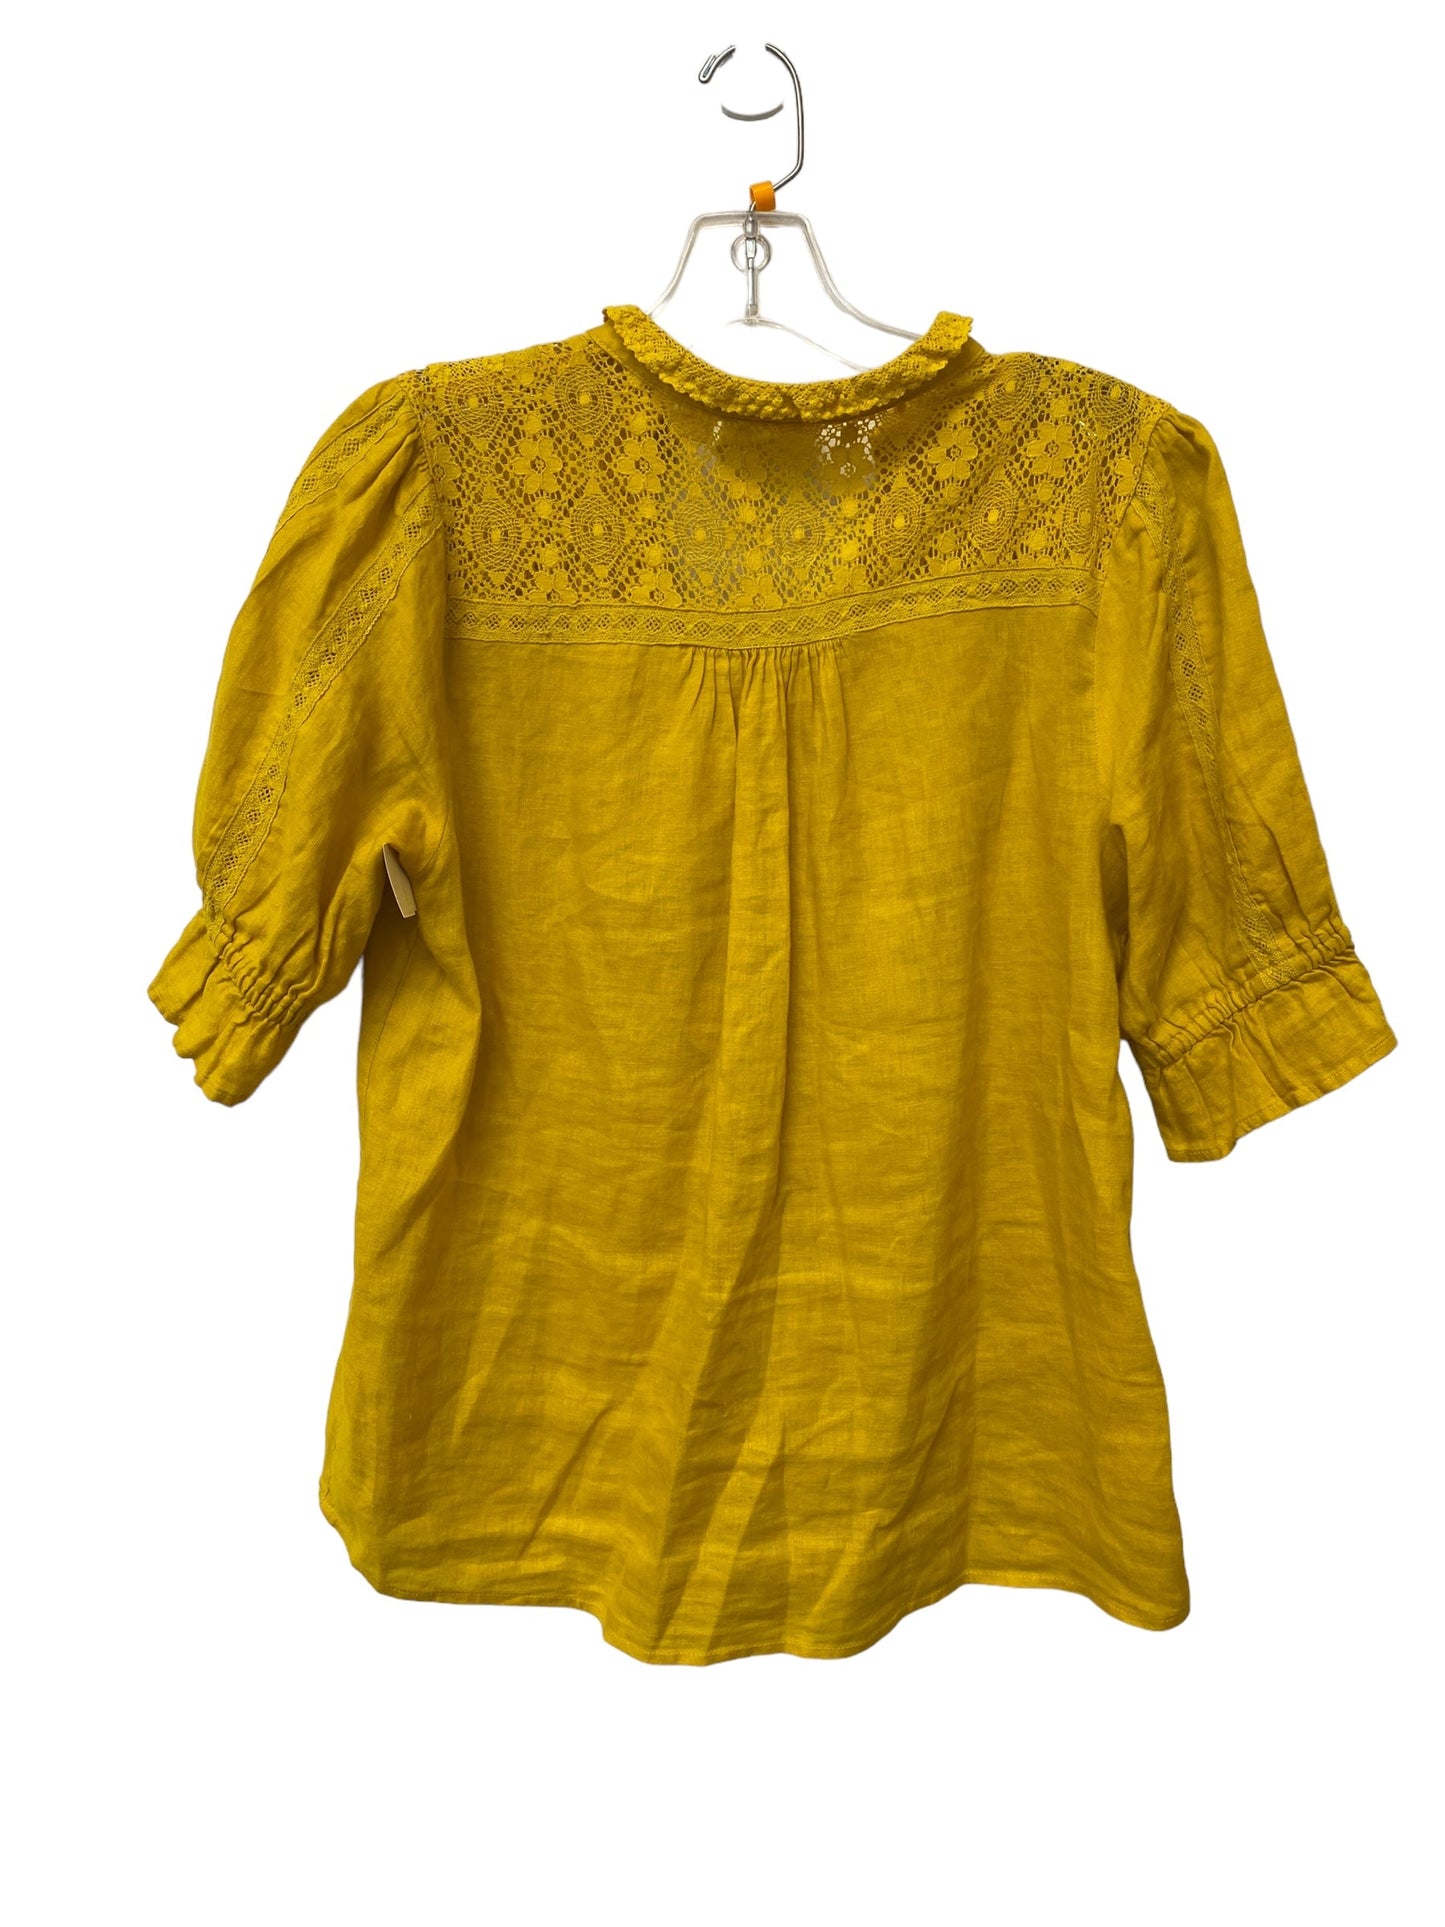 Yellow Top Short Sleeve Maeve, Size 4